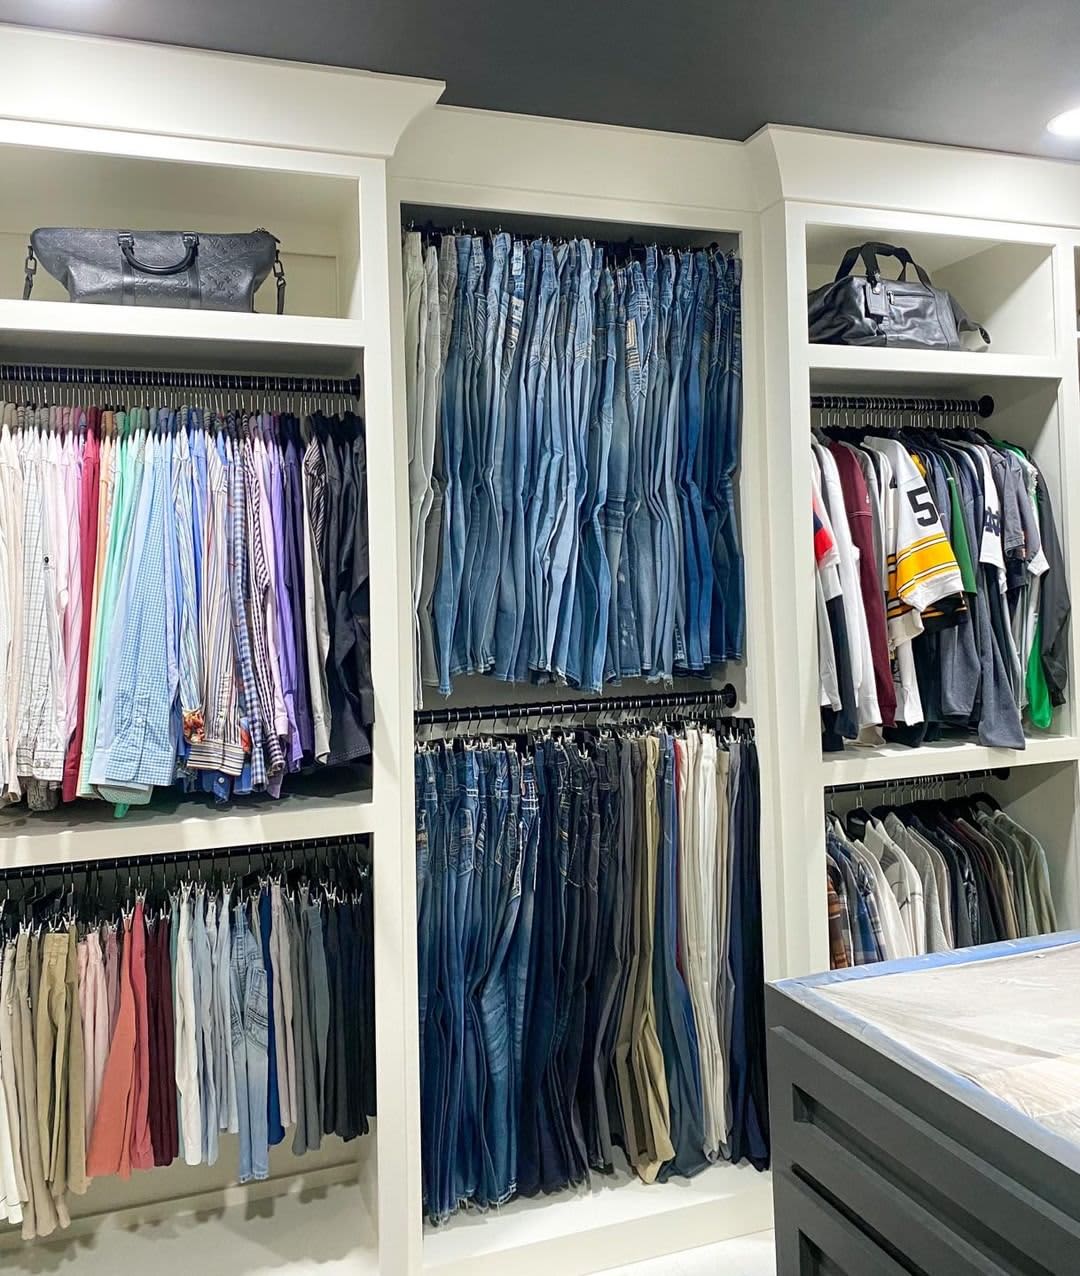 23 Tips to Organize a Small Closet With Lots of Clothes